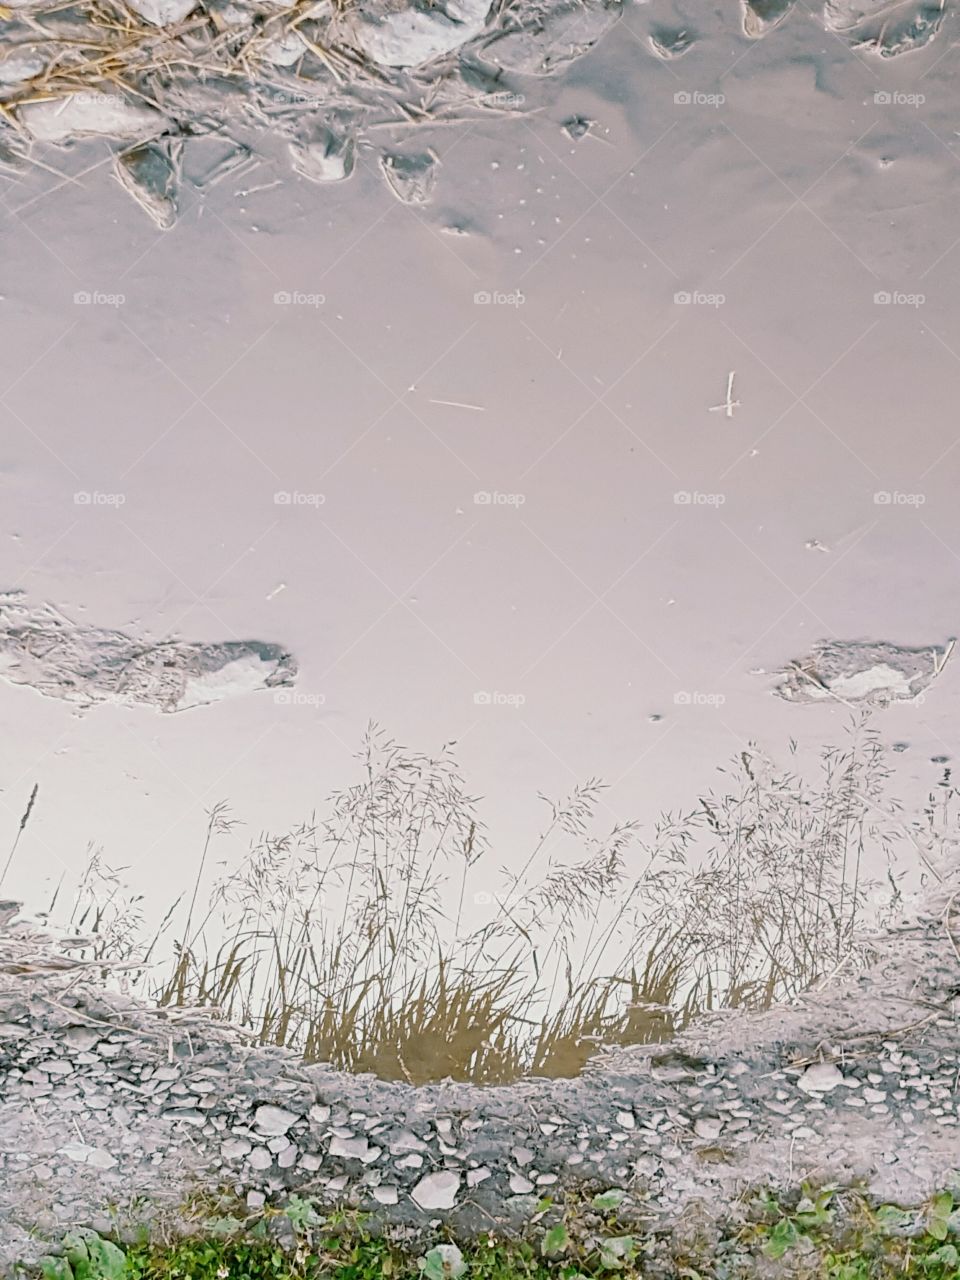 reflection In a puddle